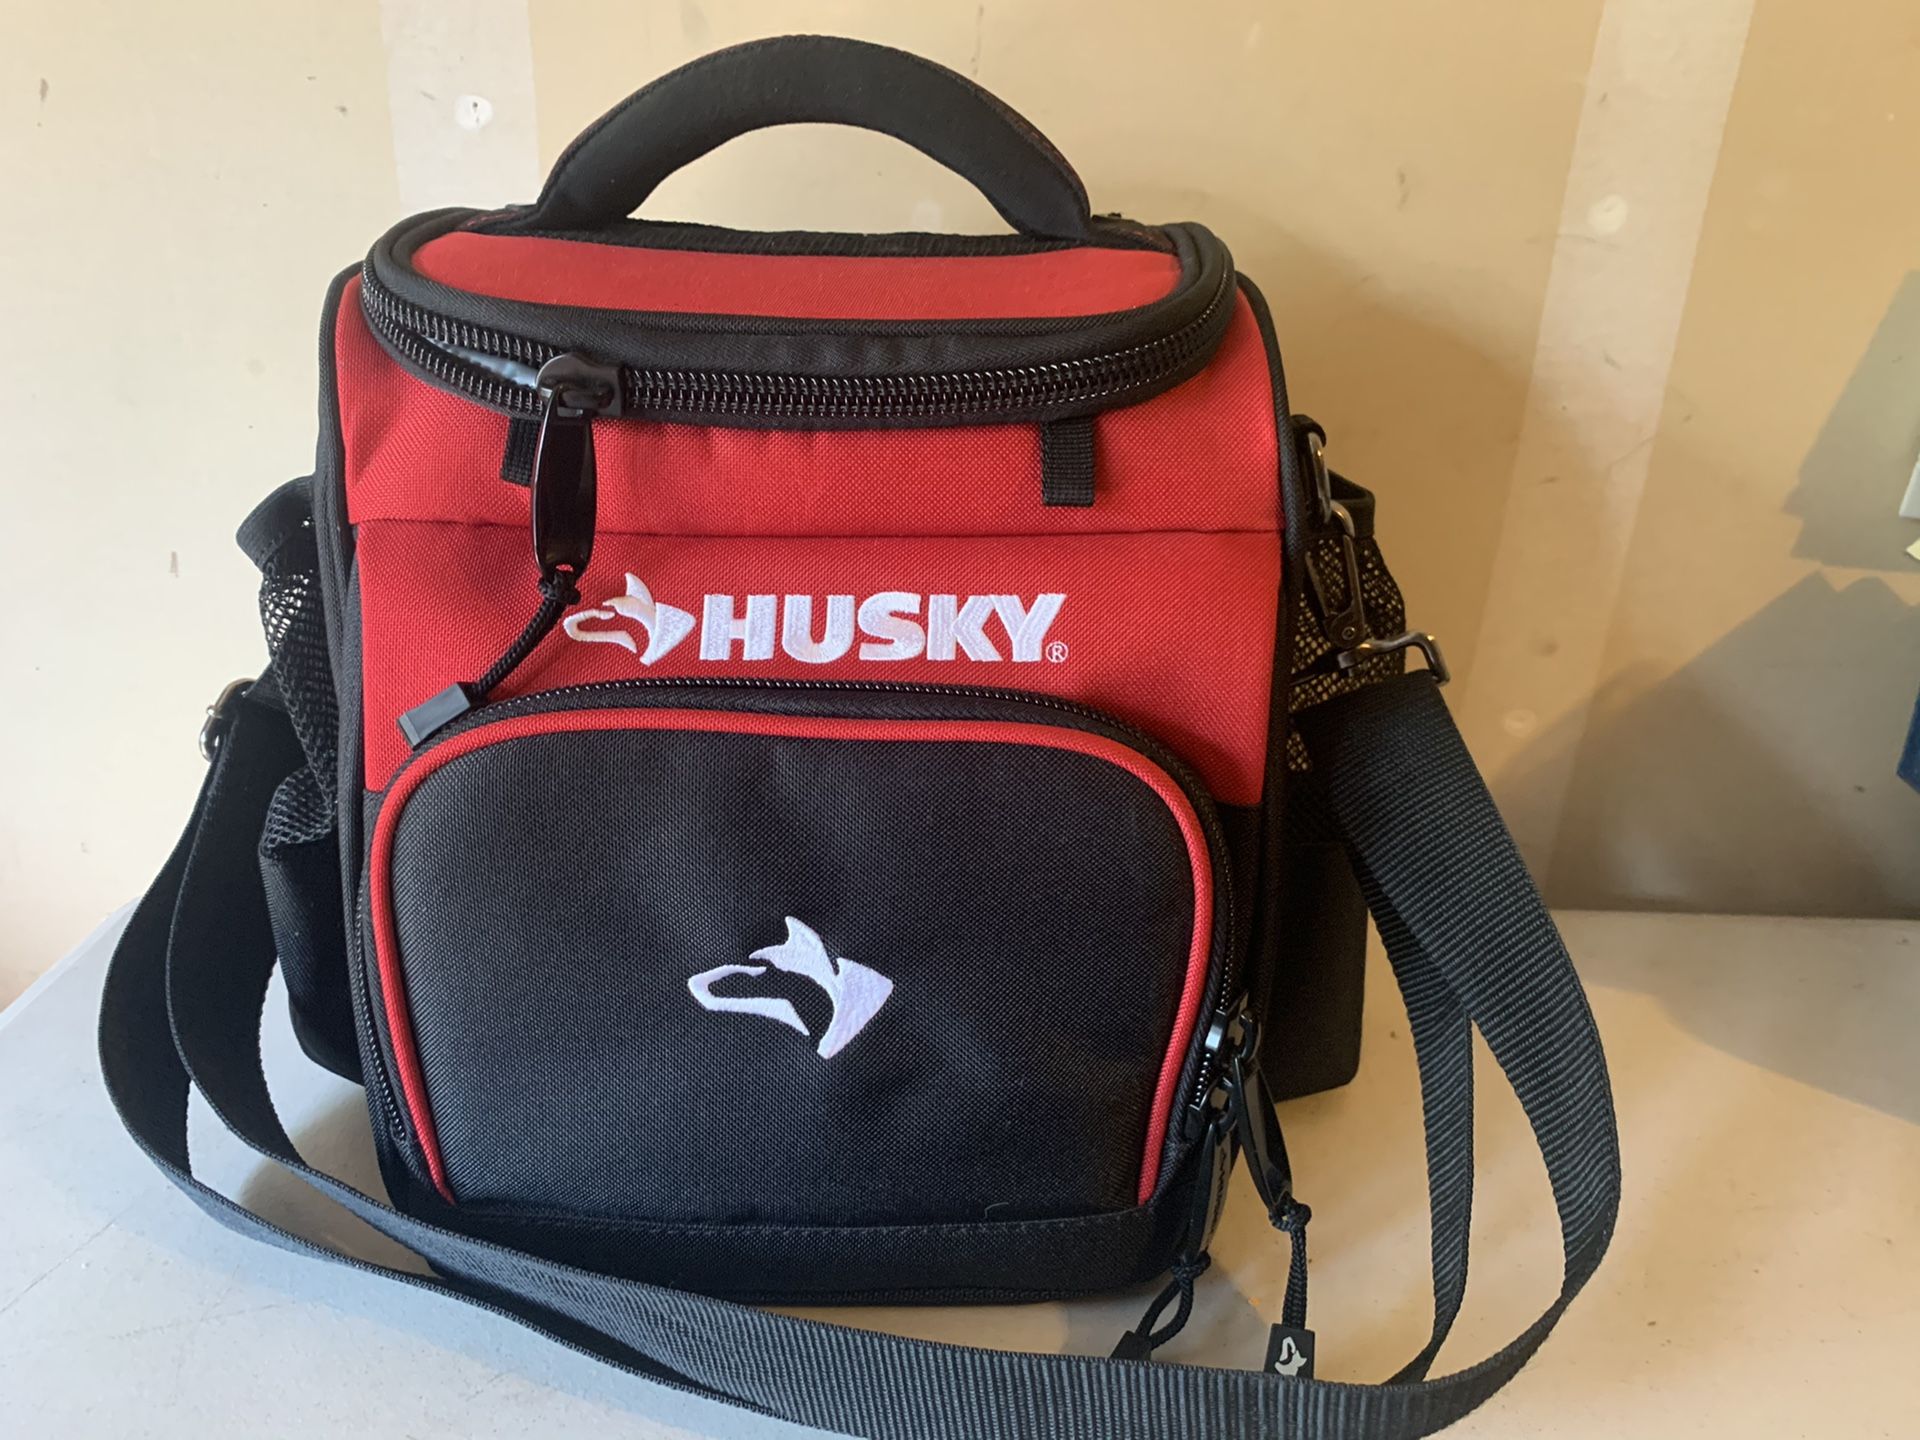 Husky-water and weather resistant insulated cooler.